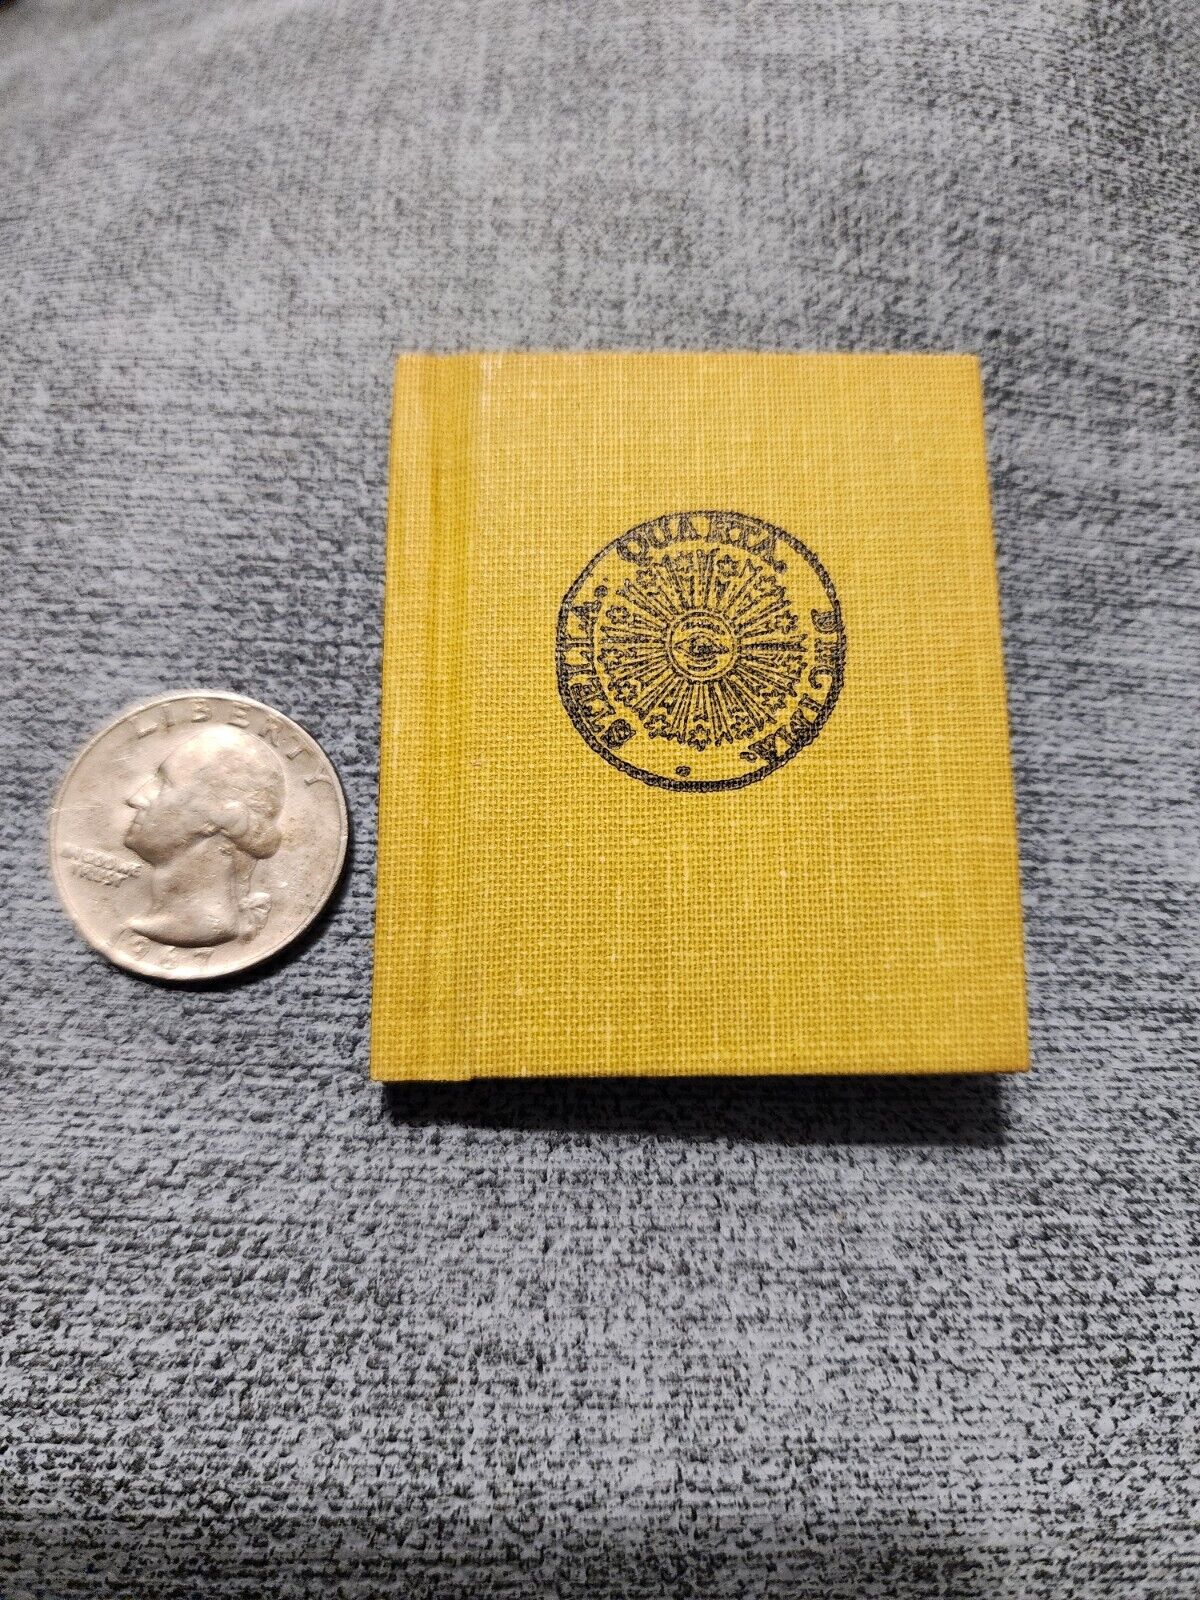 Miniature Book Colonial Coins #6 Signed F. Irwin Limited Edition Hillside 